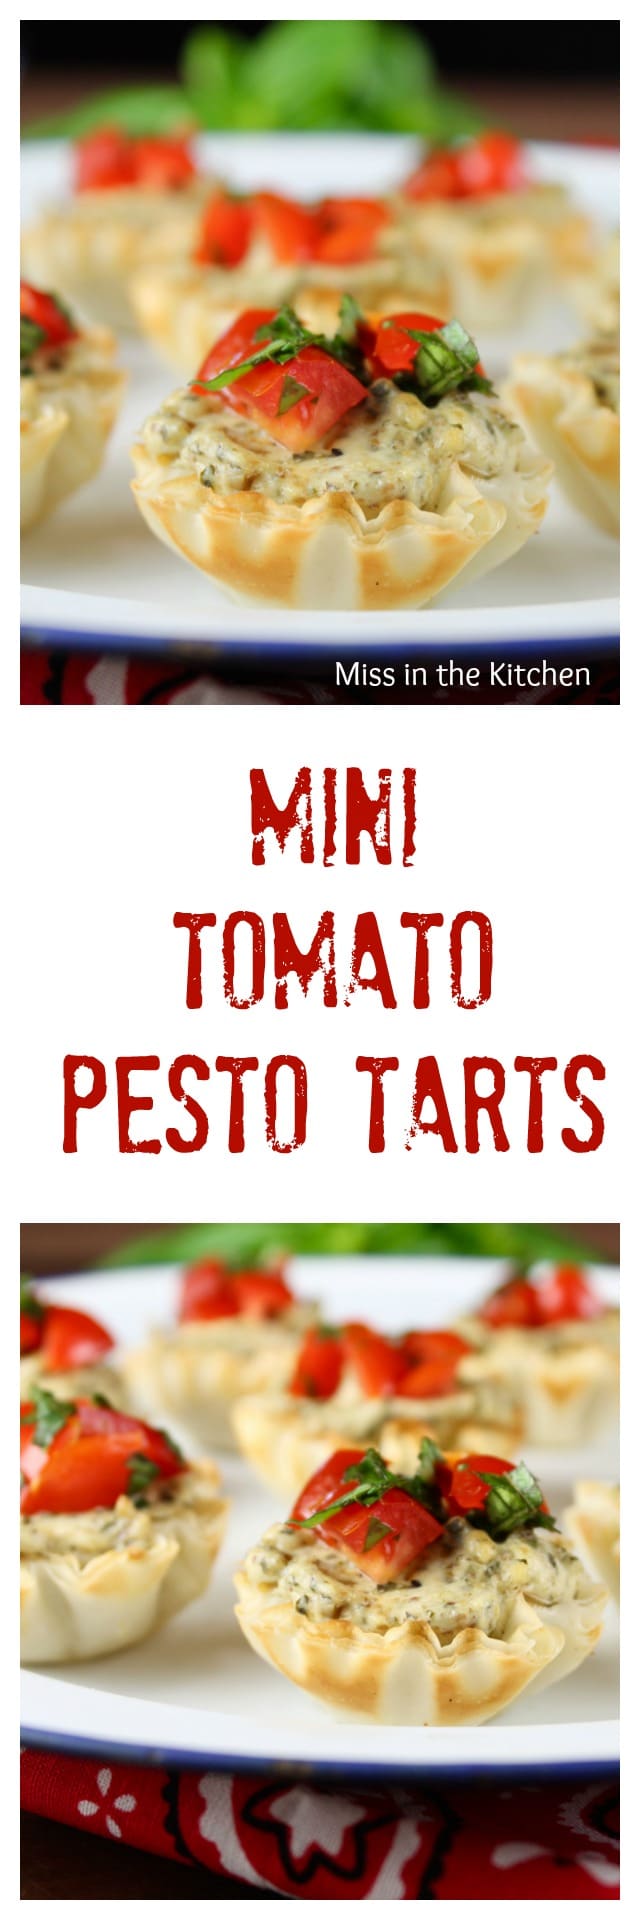 Mini Tomato Pesto Tarts are a great appetizer or parties, barbecues and get togethers! From MissintheKitchen.com #BBQBites #ad